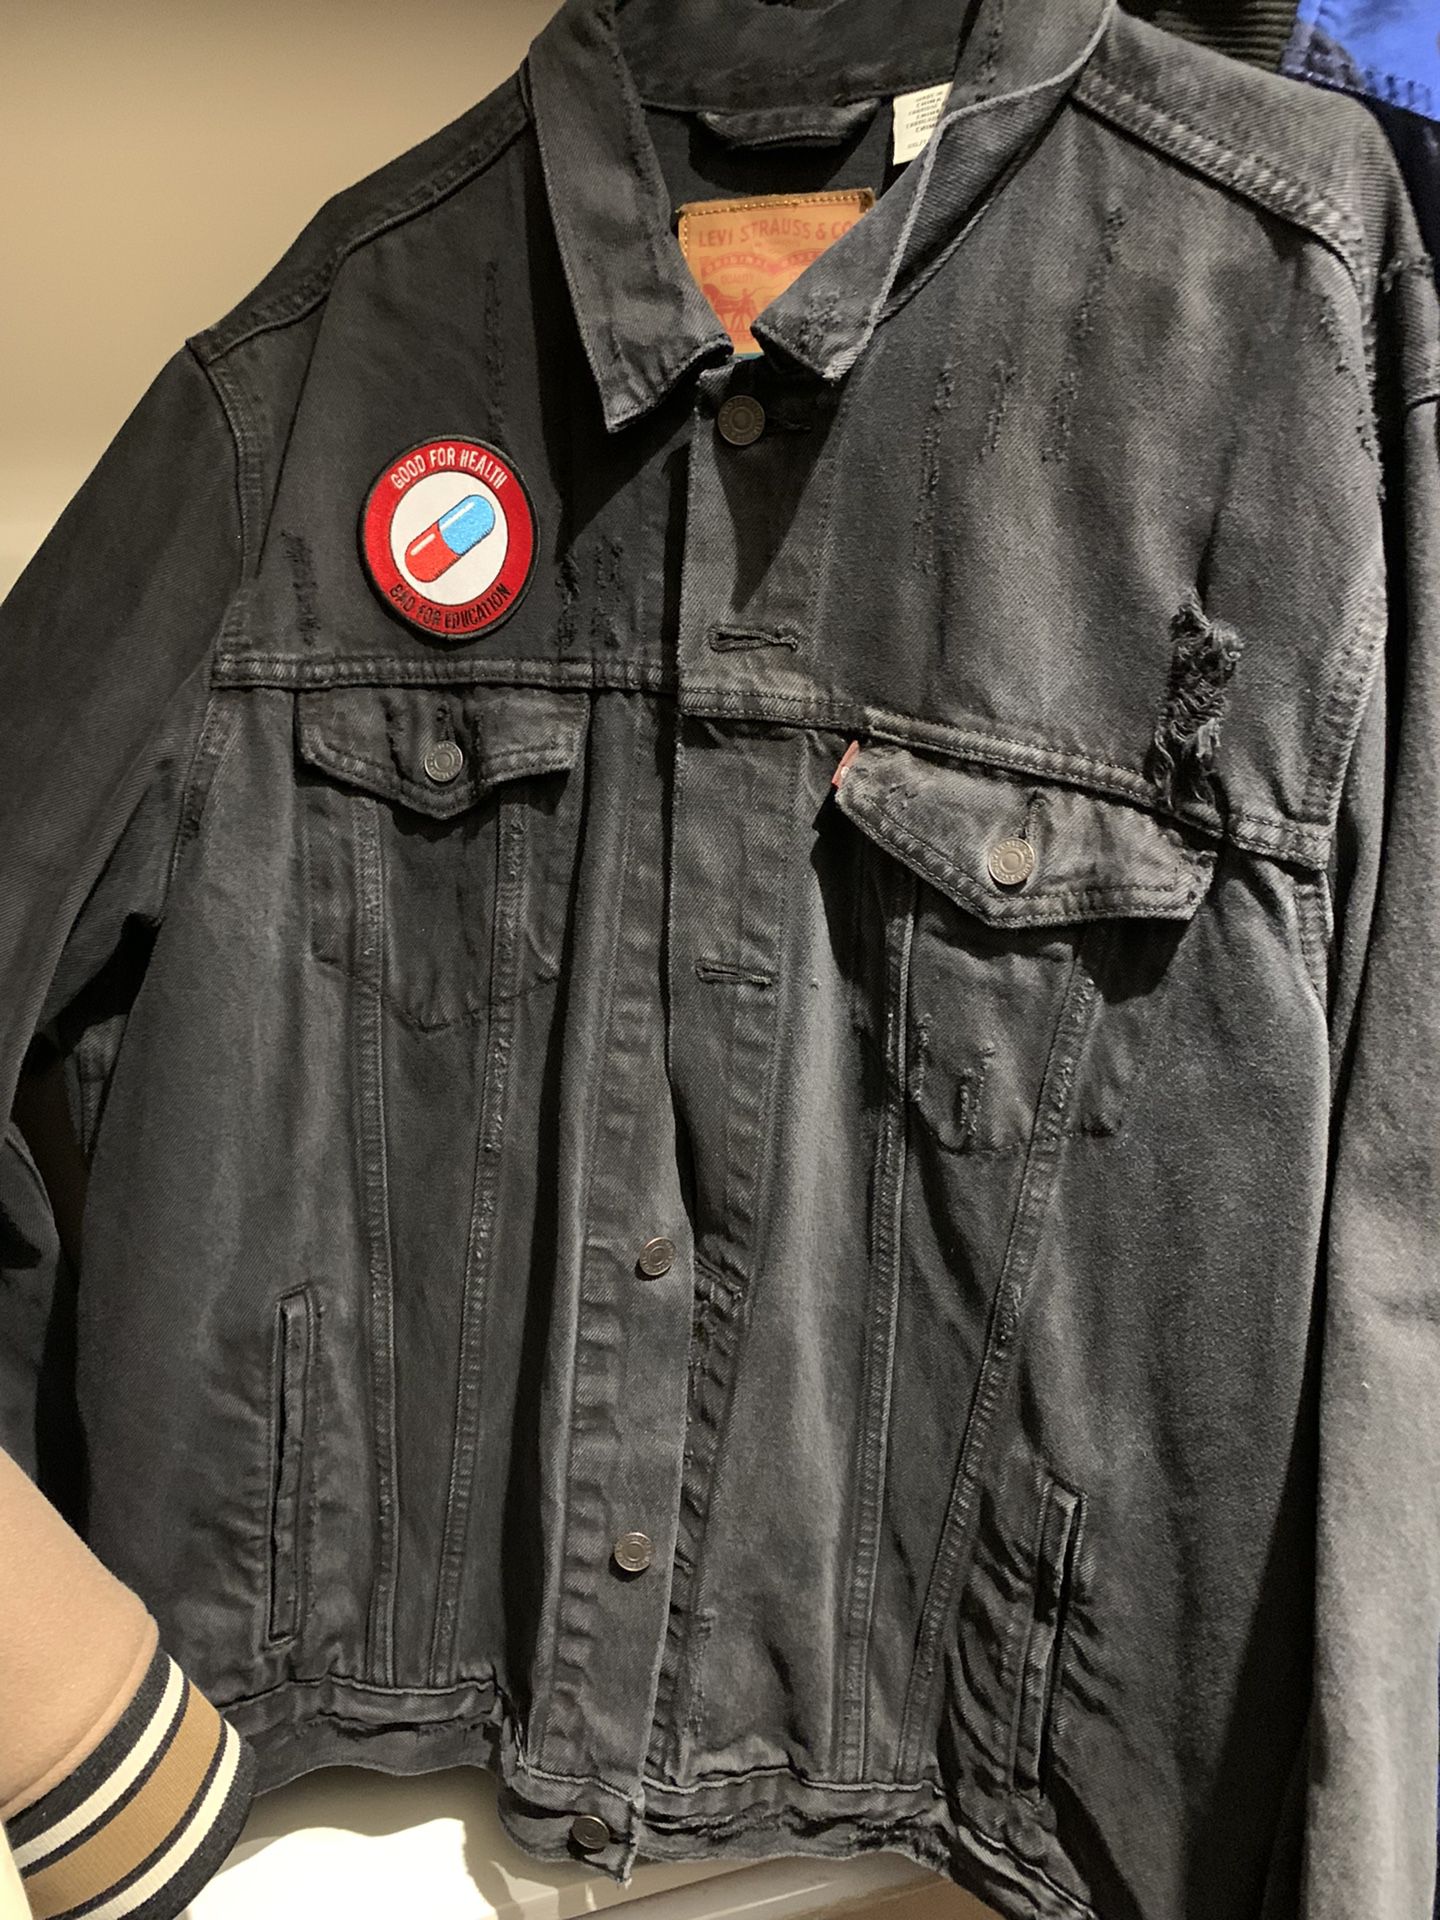 Denim Jacket With Iron On Patch